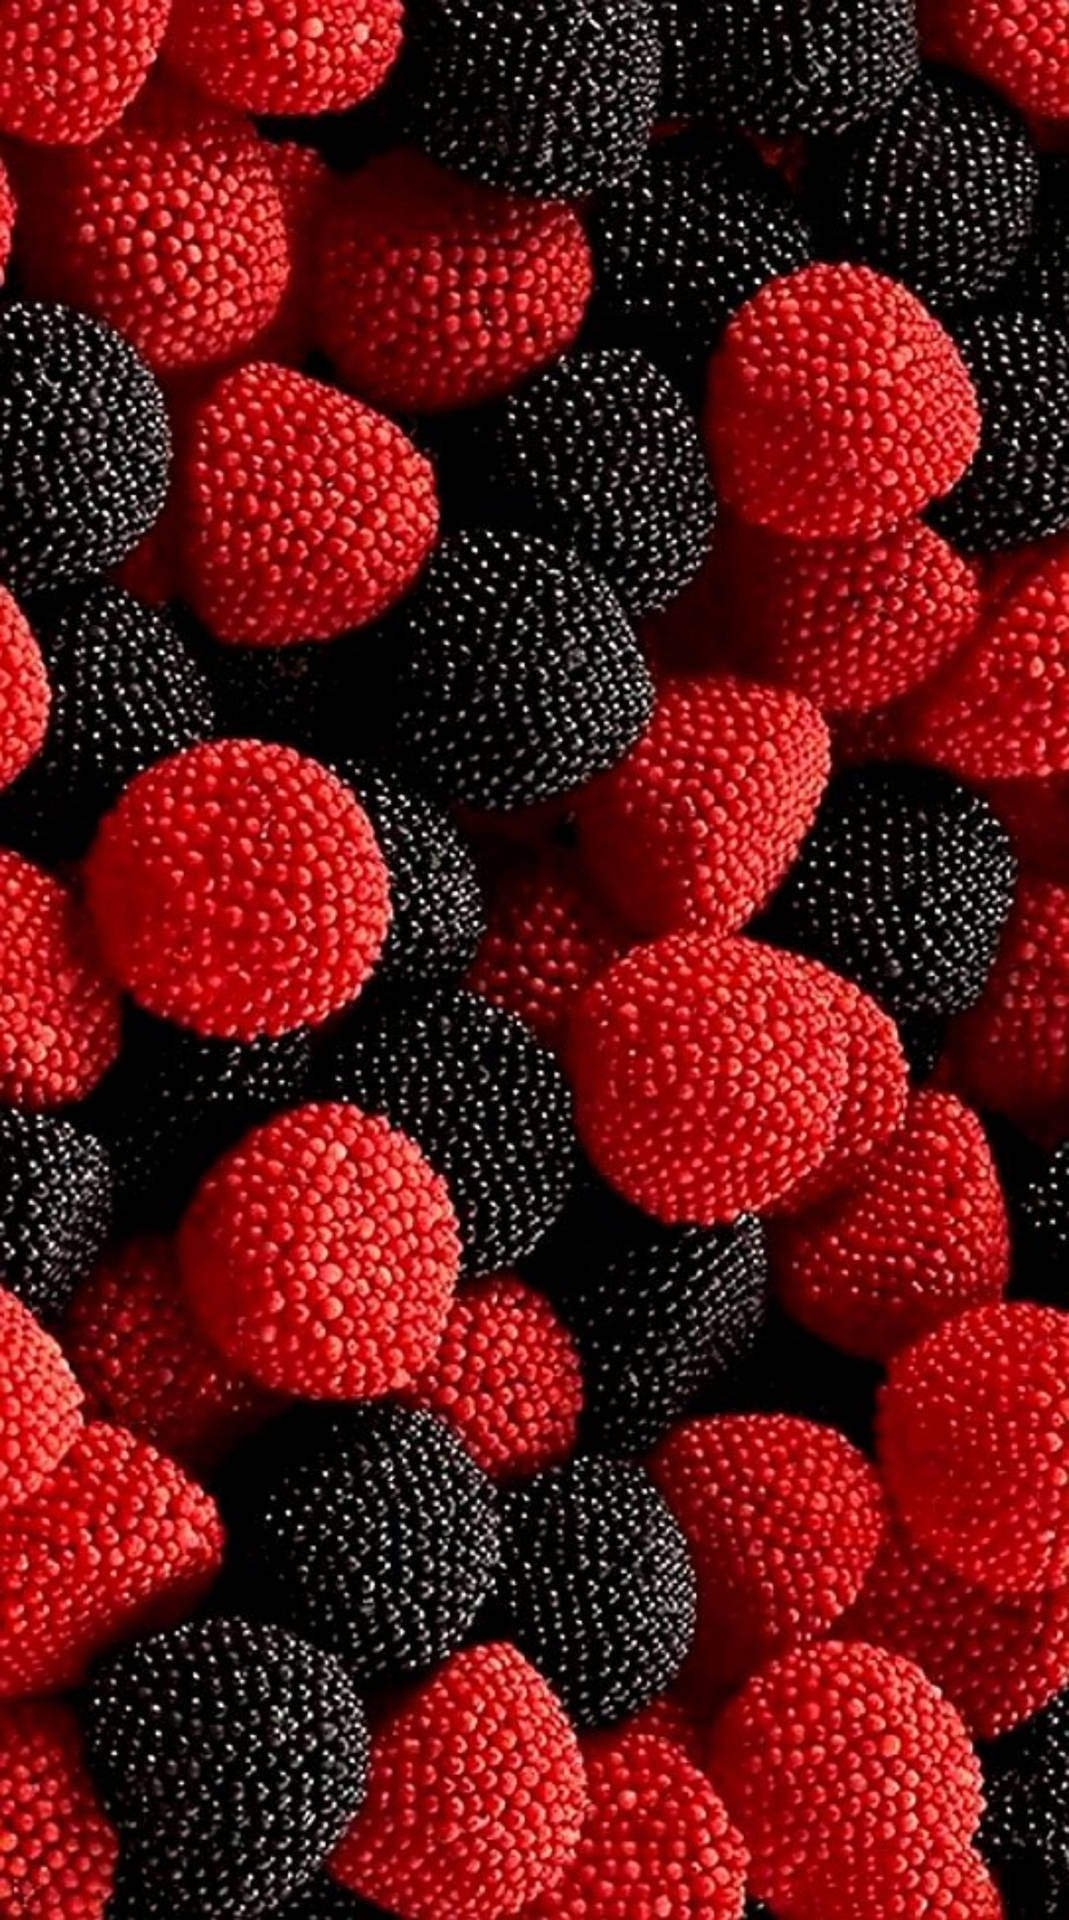 Black And Red Berries Samsung Full Hd Picture